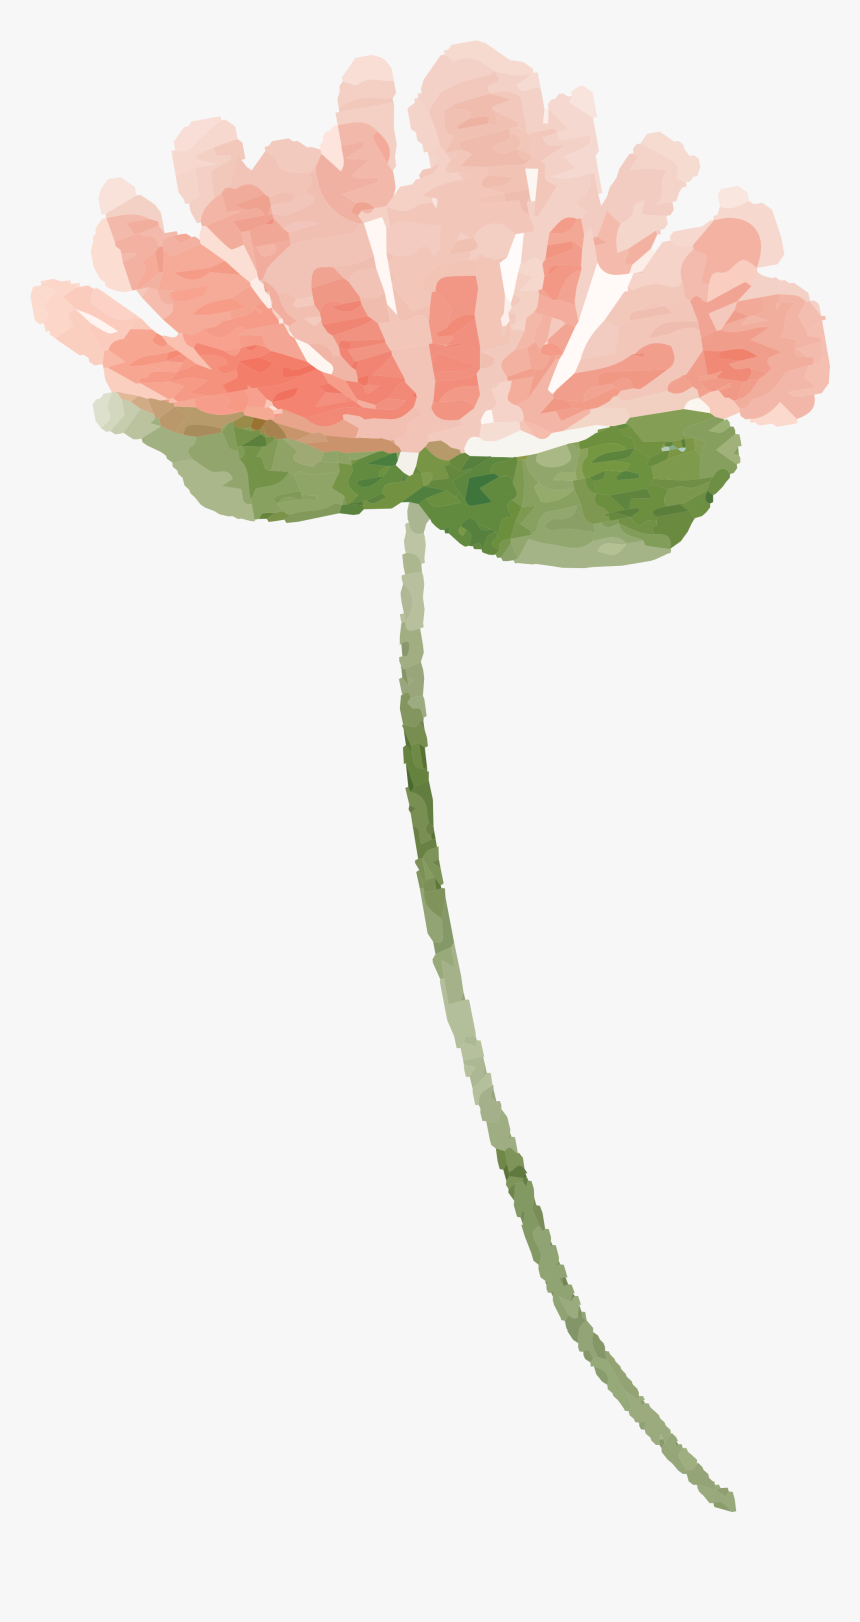 Cute Watercolor Flowers Png, Transparent Png, Free Download